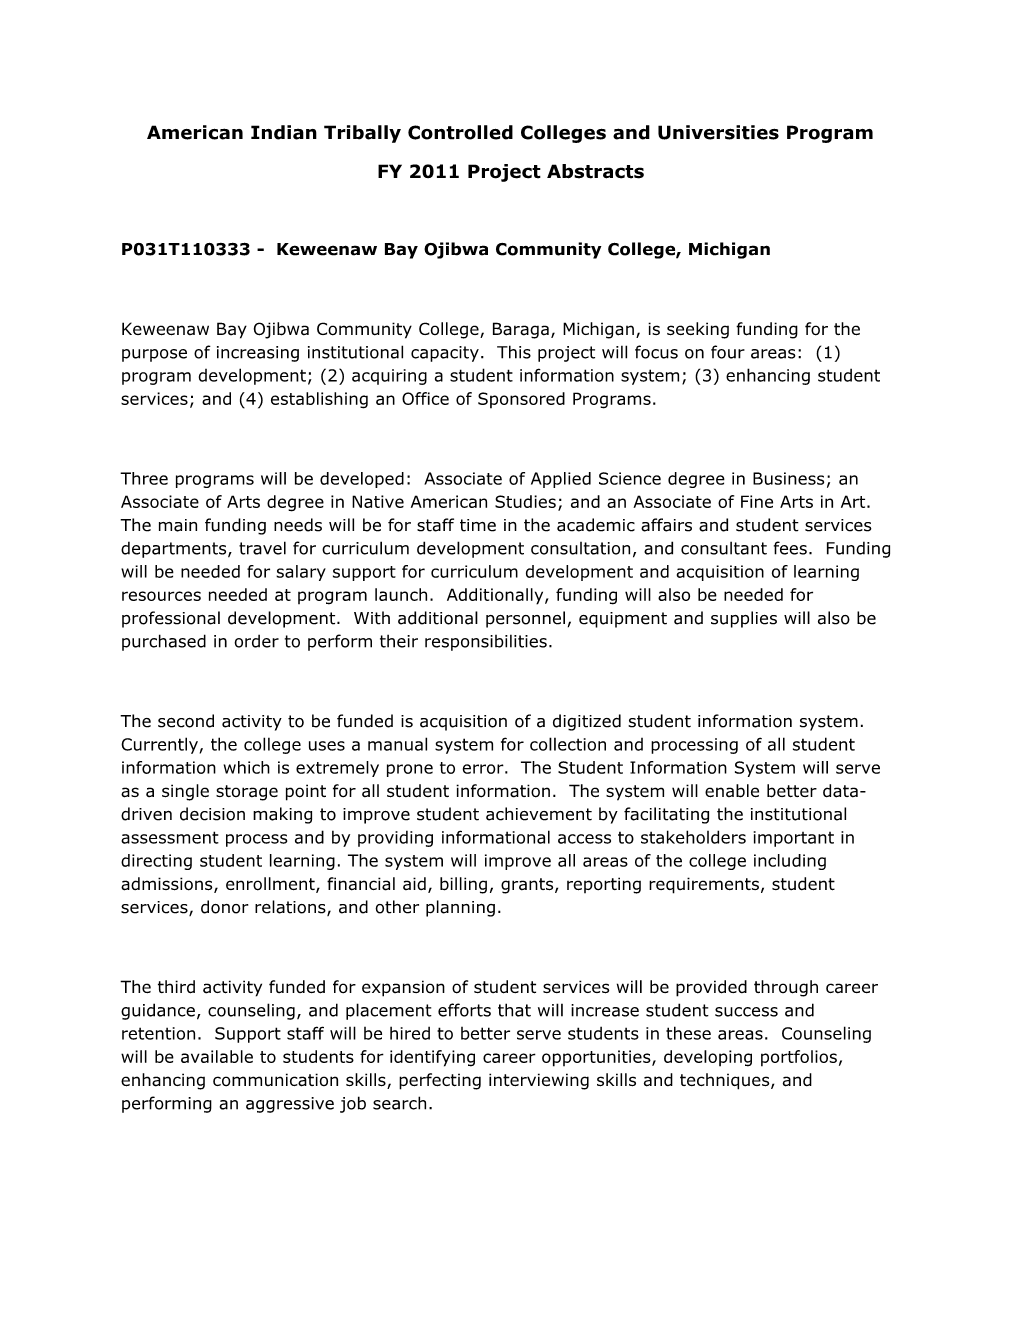 FY 2011 Project Abstracts for the American Indian Tribally Controlled Colleges and Universities